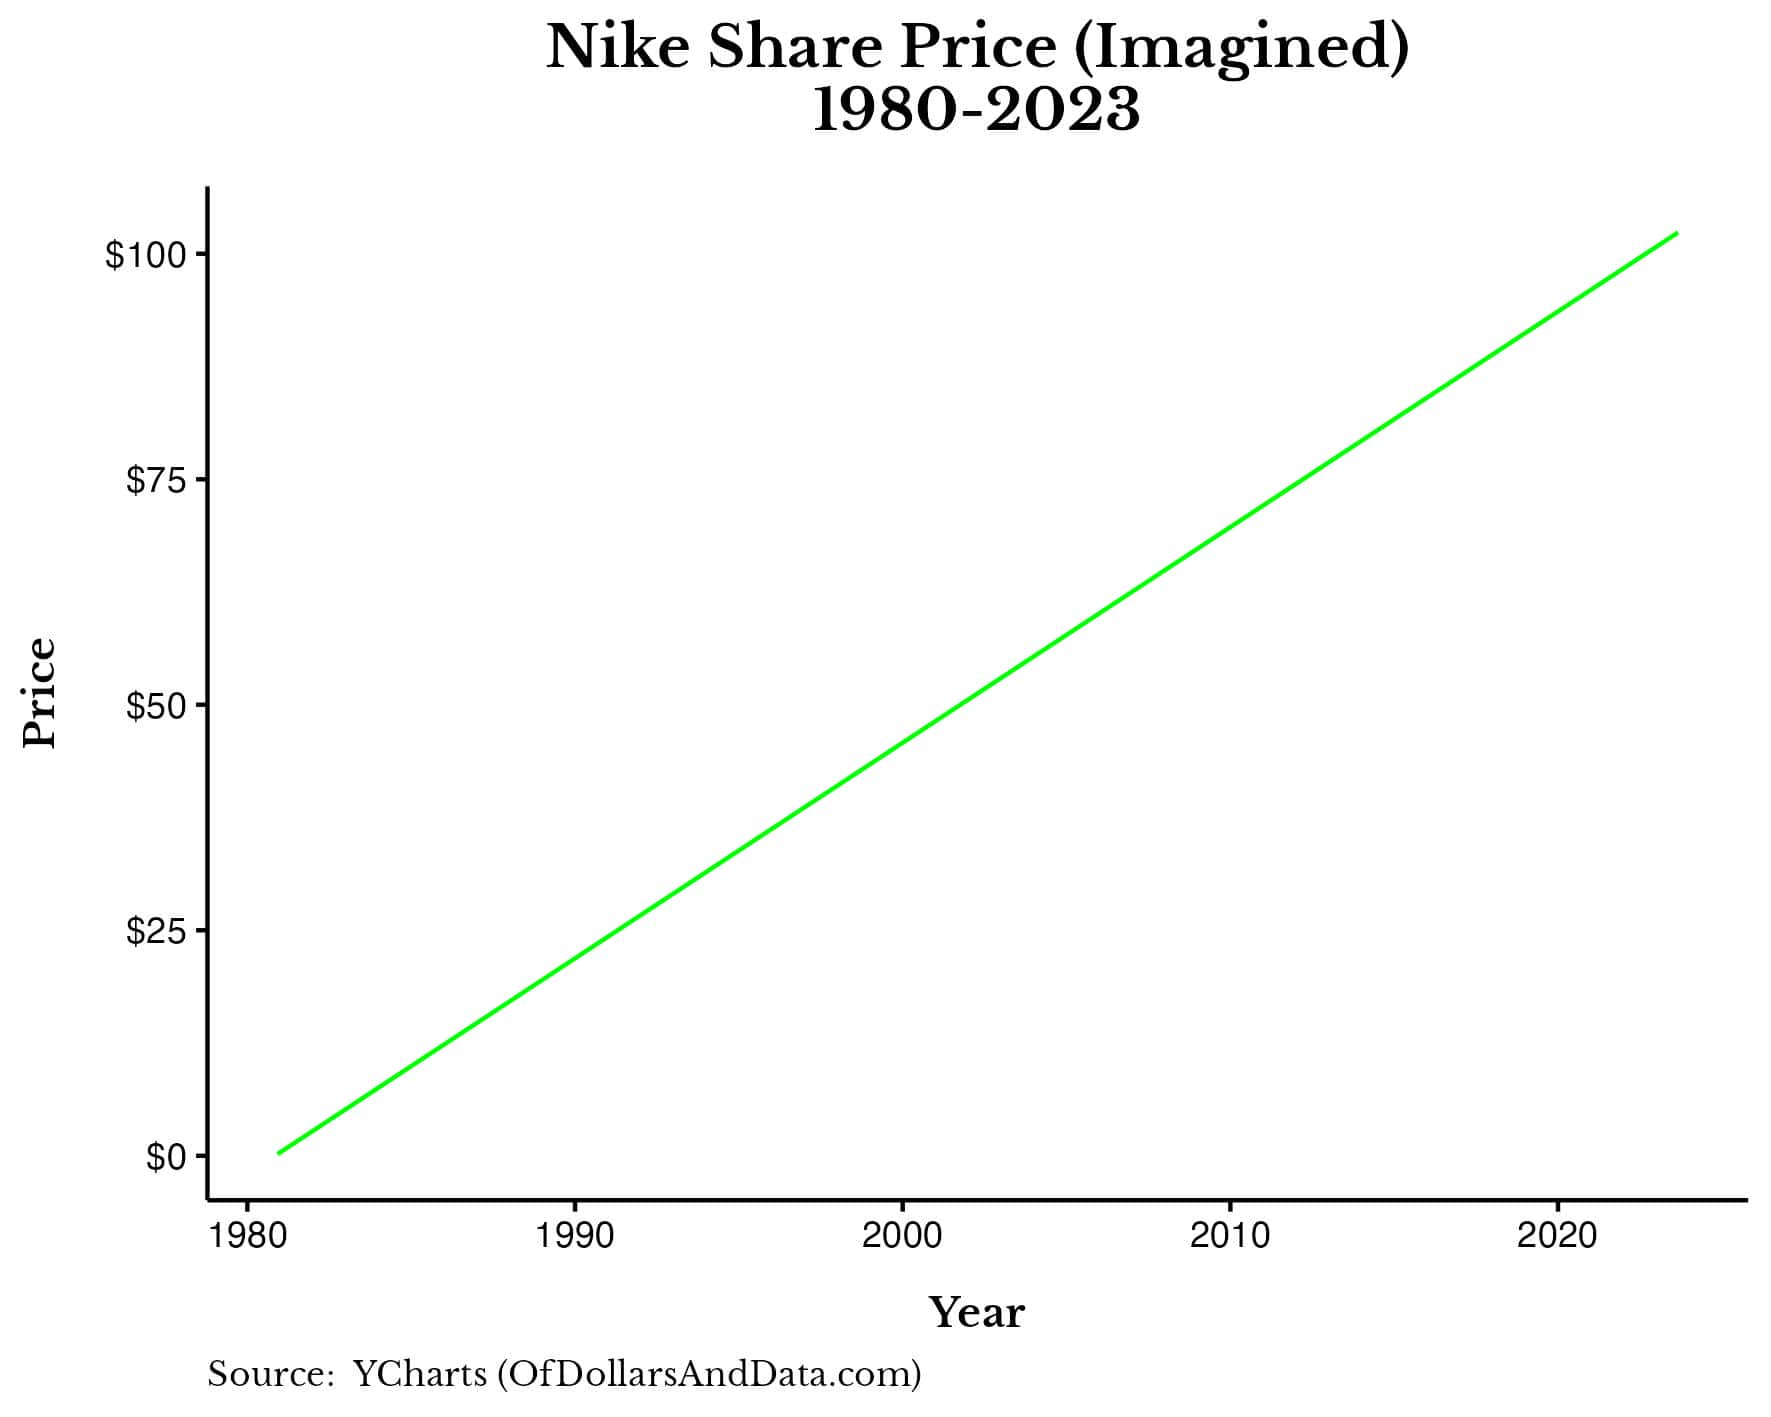 Chart showing Nike's imagined share price back to 1980.